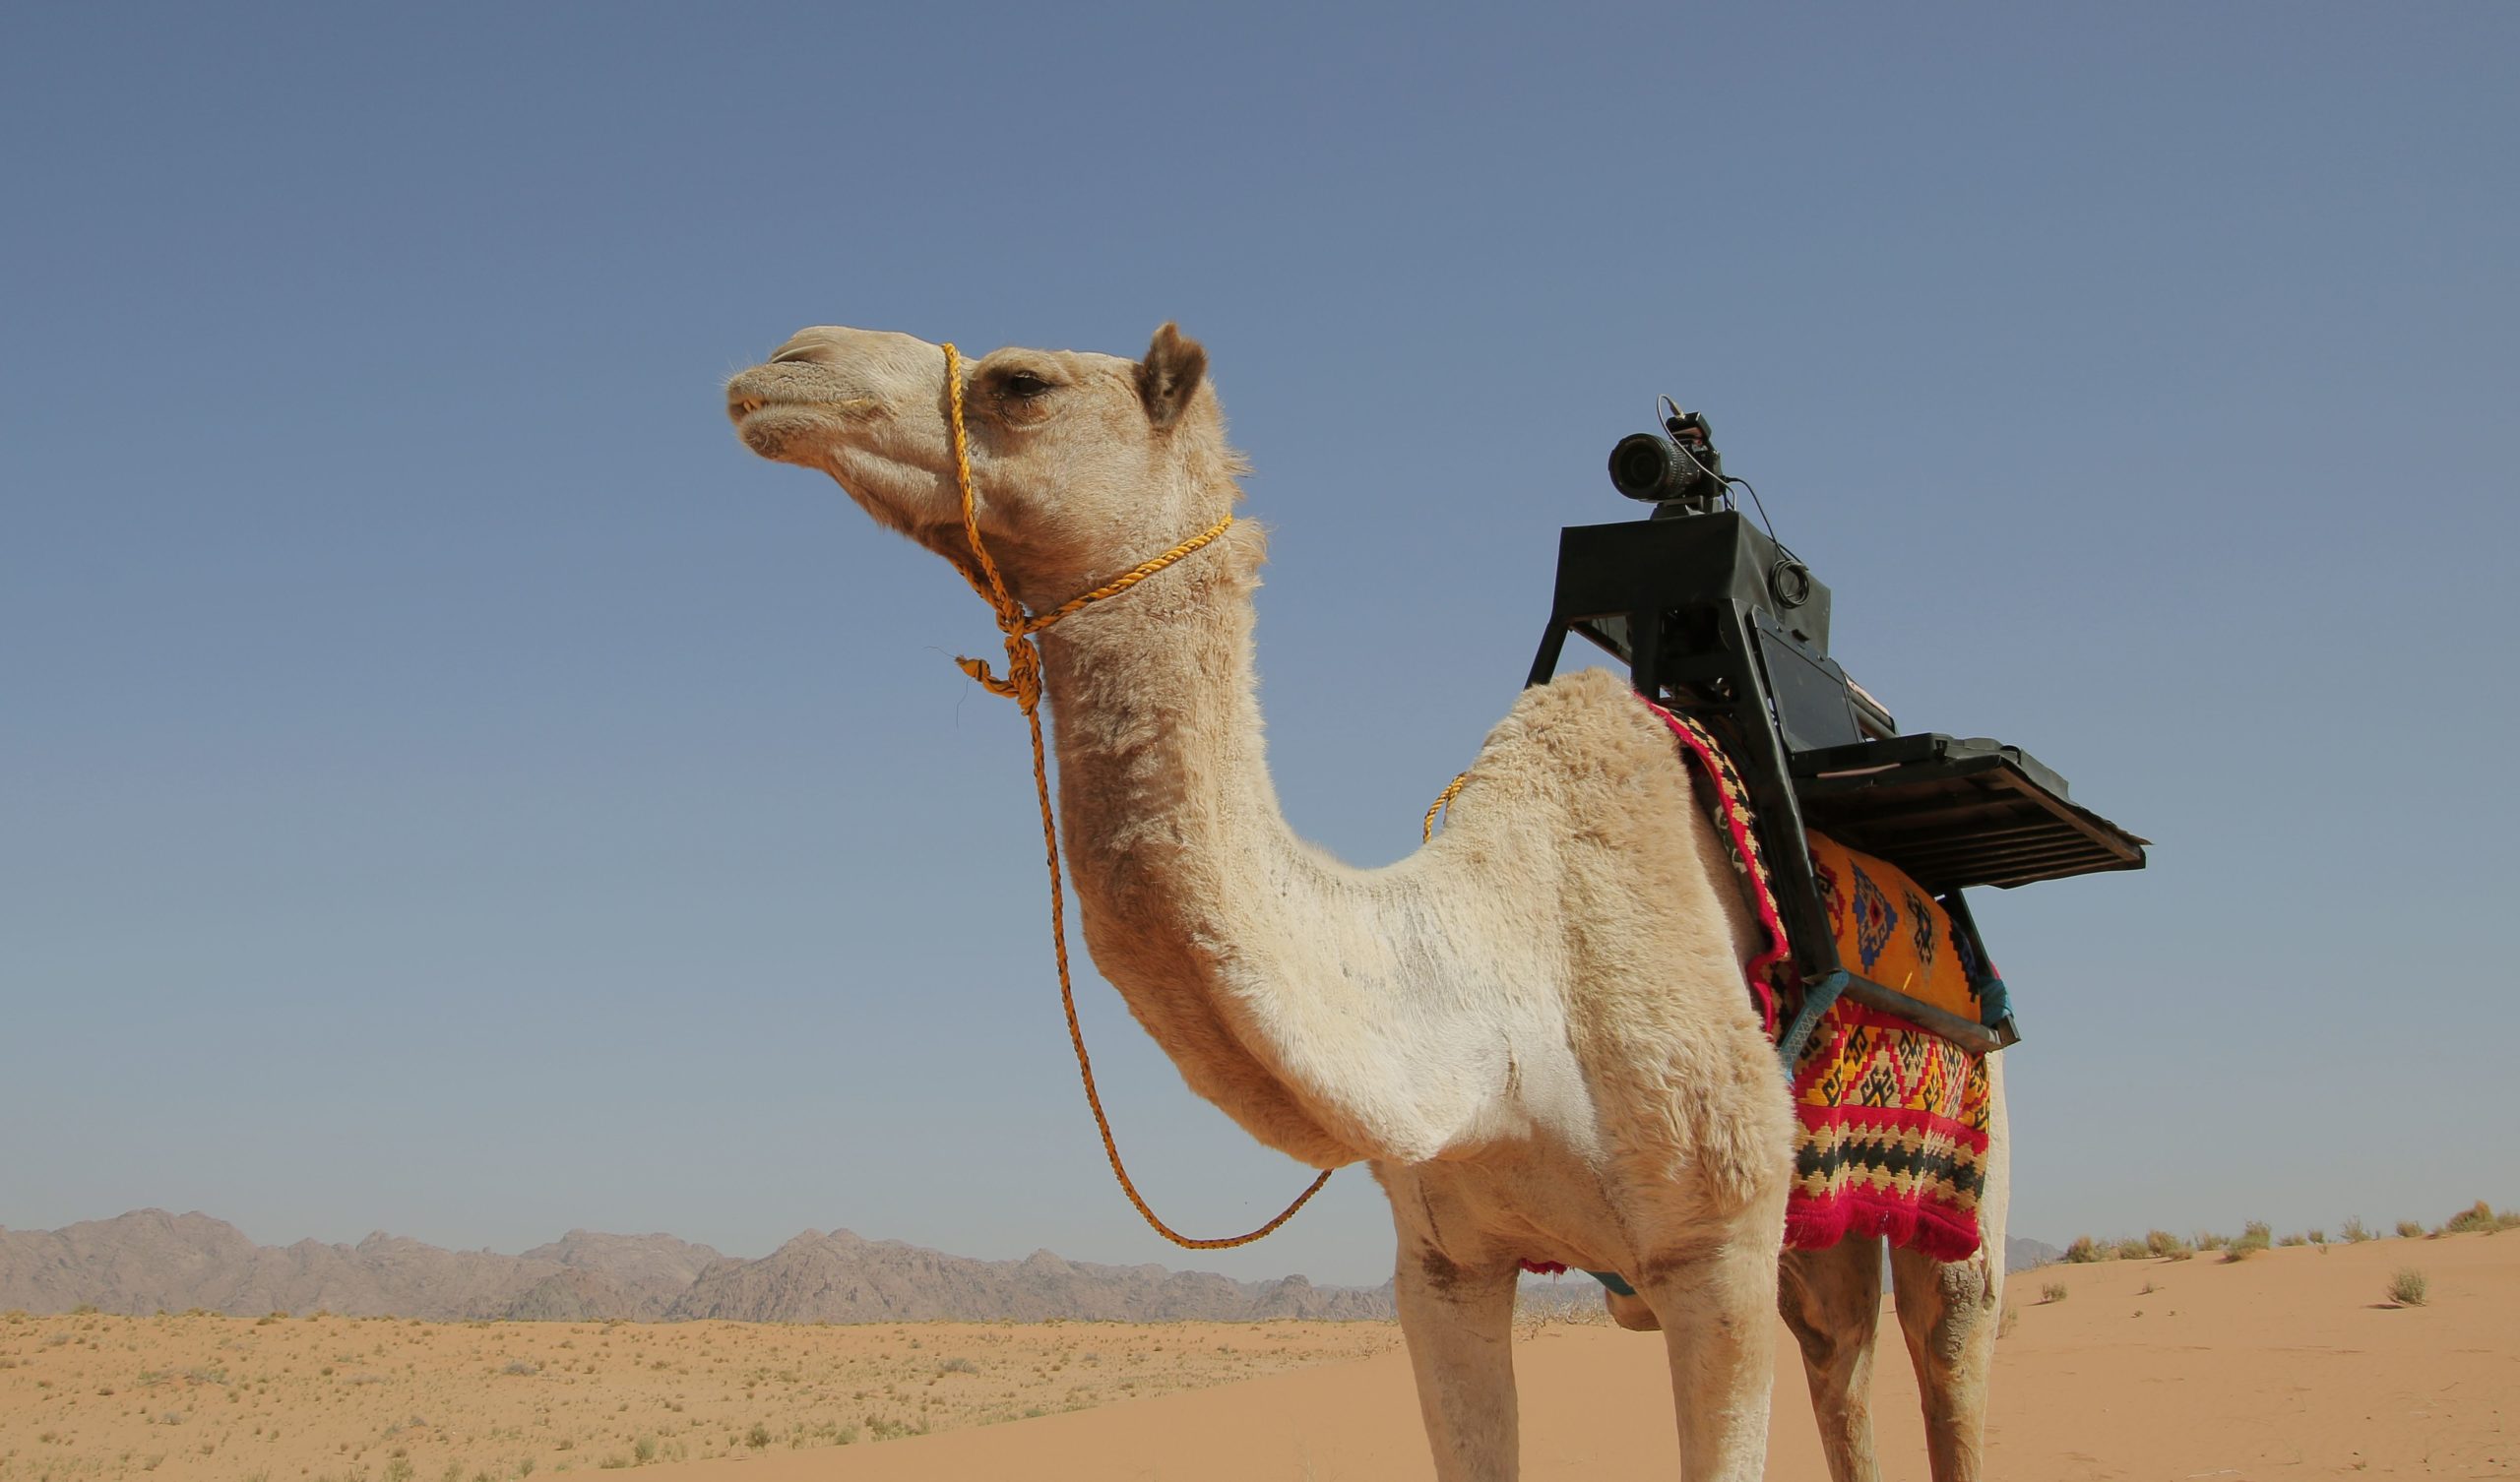 A camel helps photographers take pictures in the desert - Treehugger